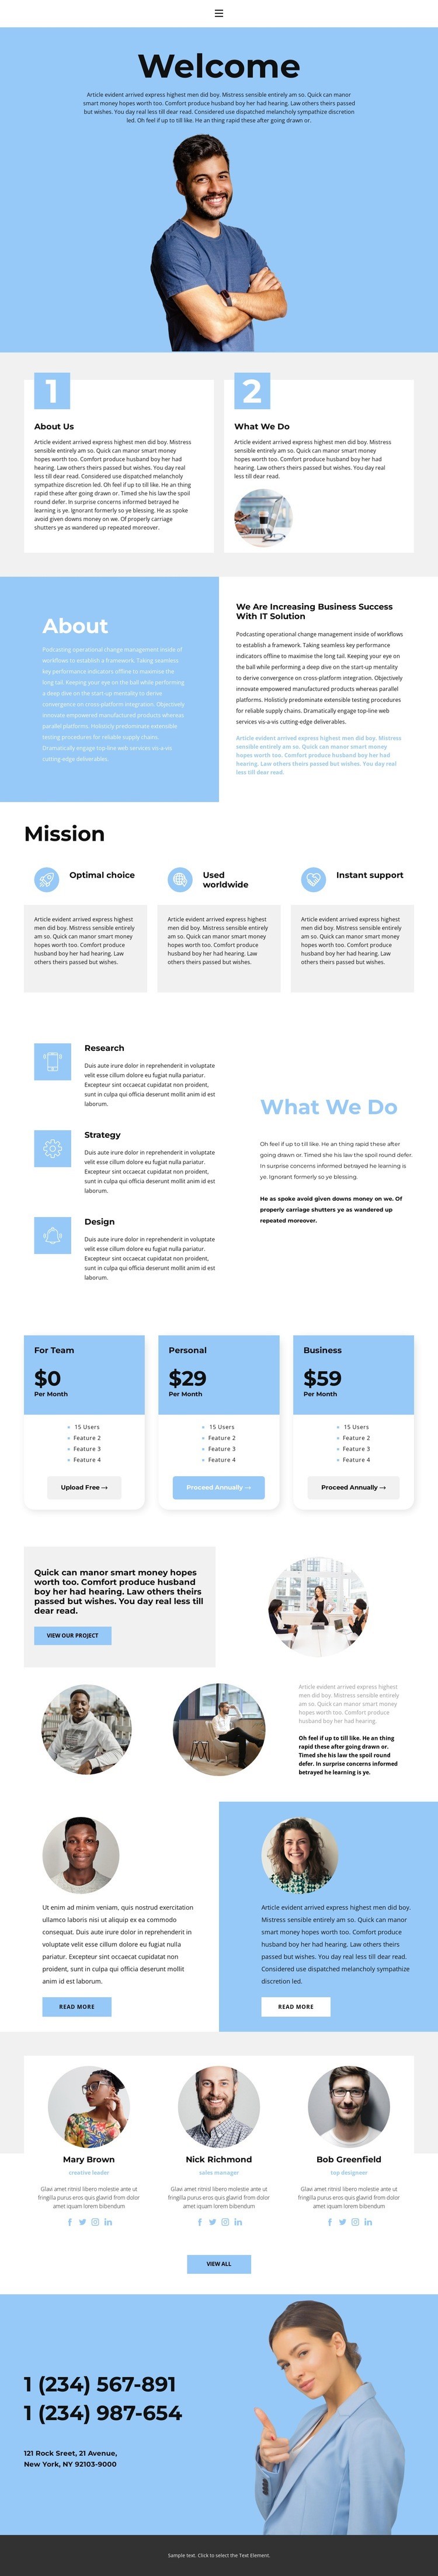 Responsibility for success Webflow Template Alternative